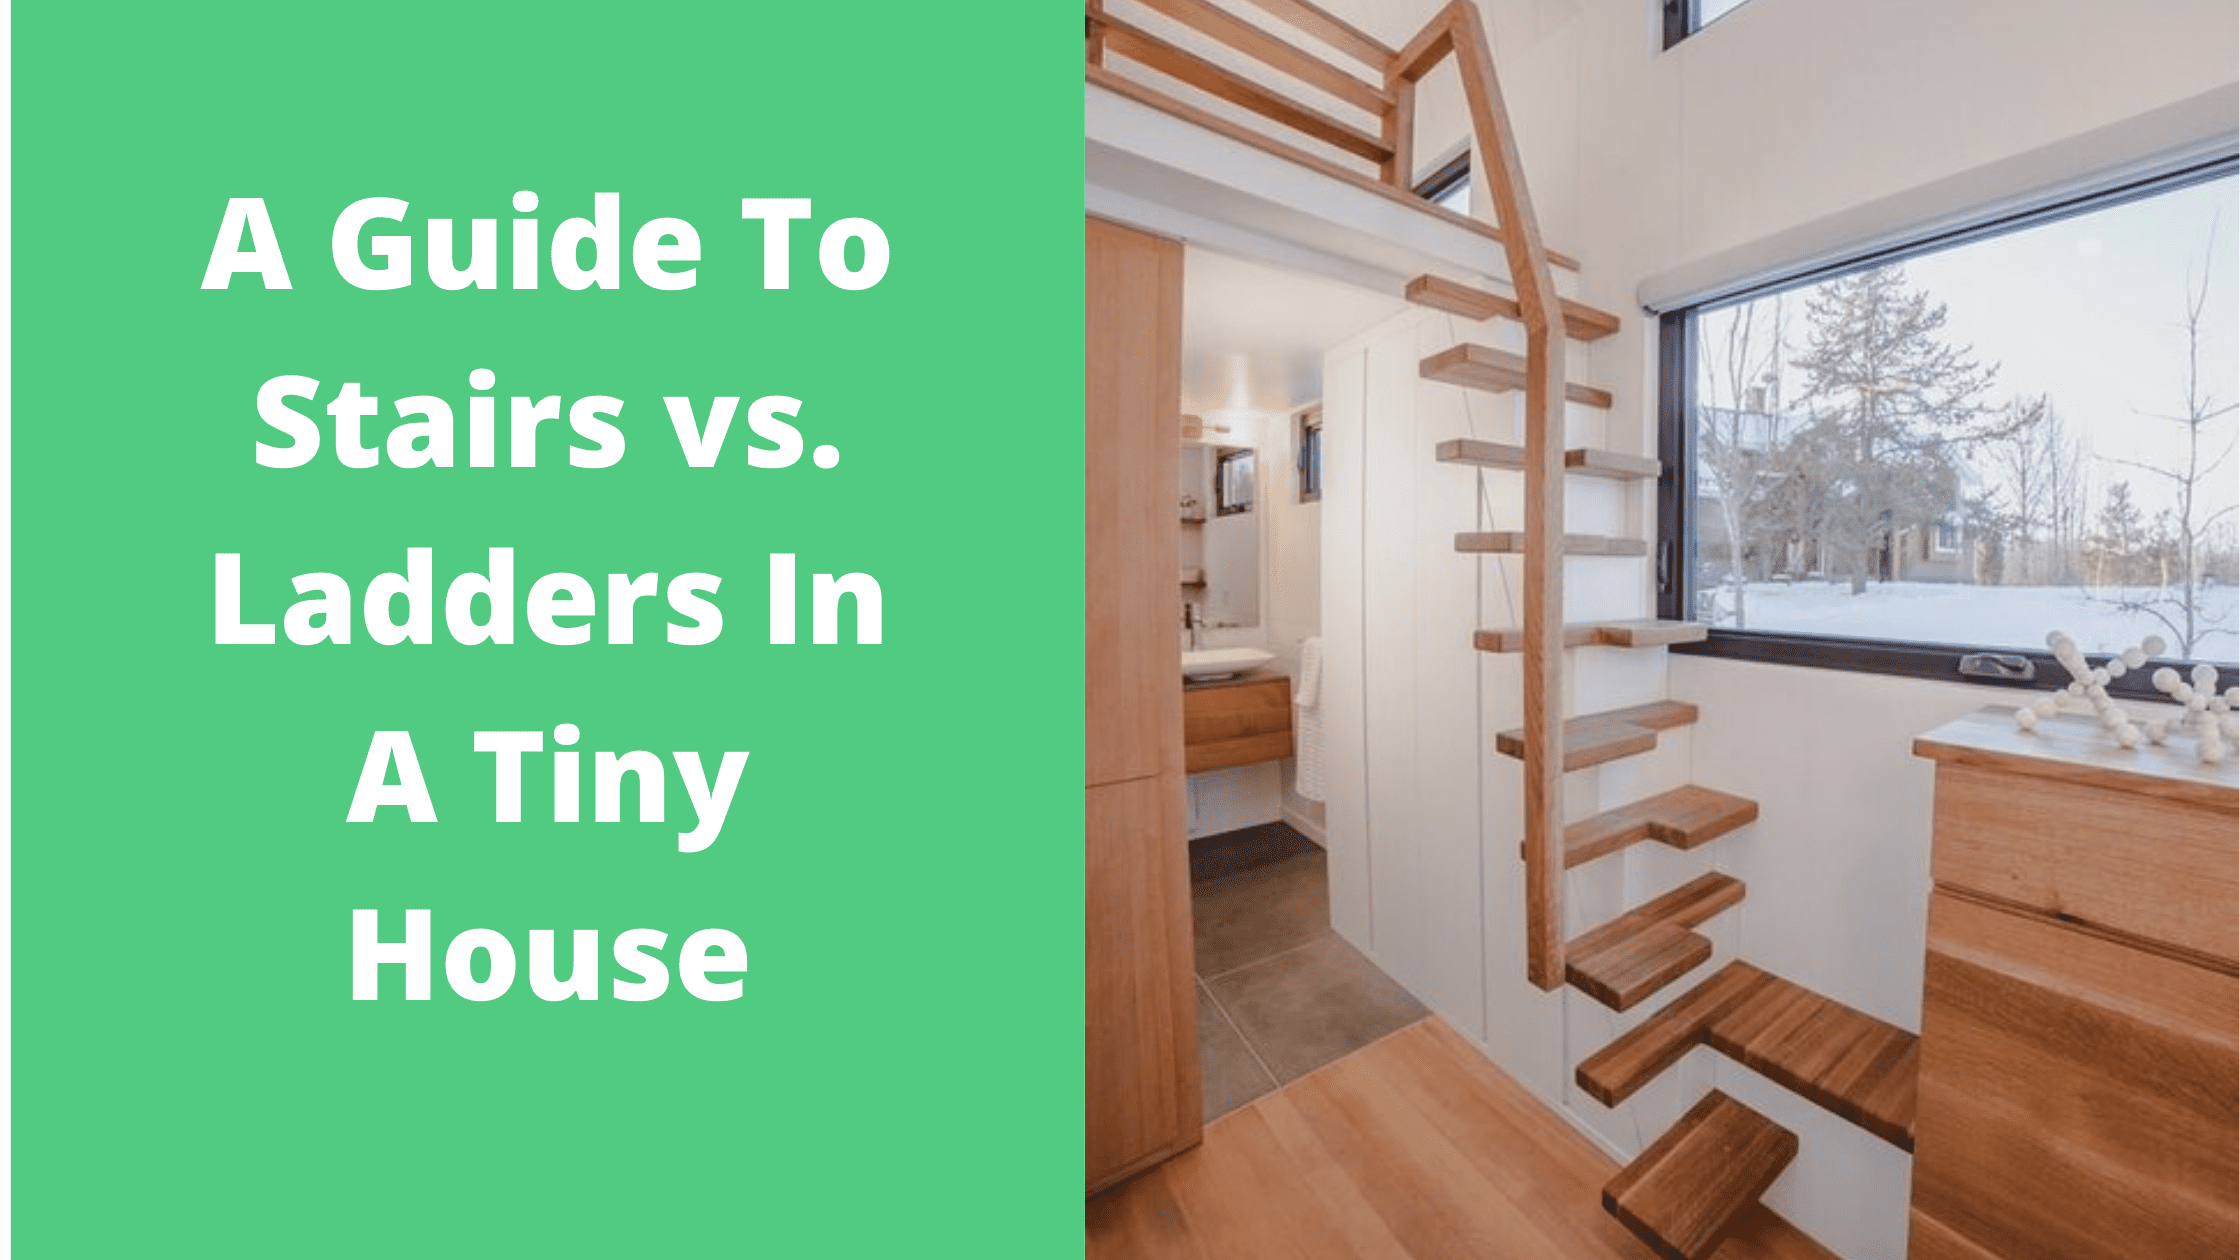 A Guide To Stairs vs. Ladders In A Tiny House